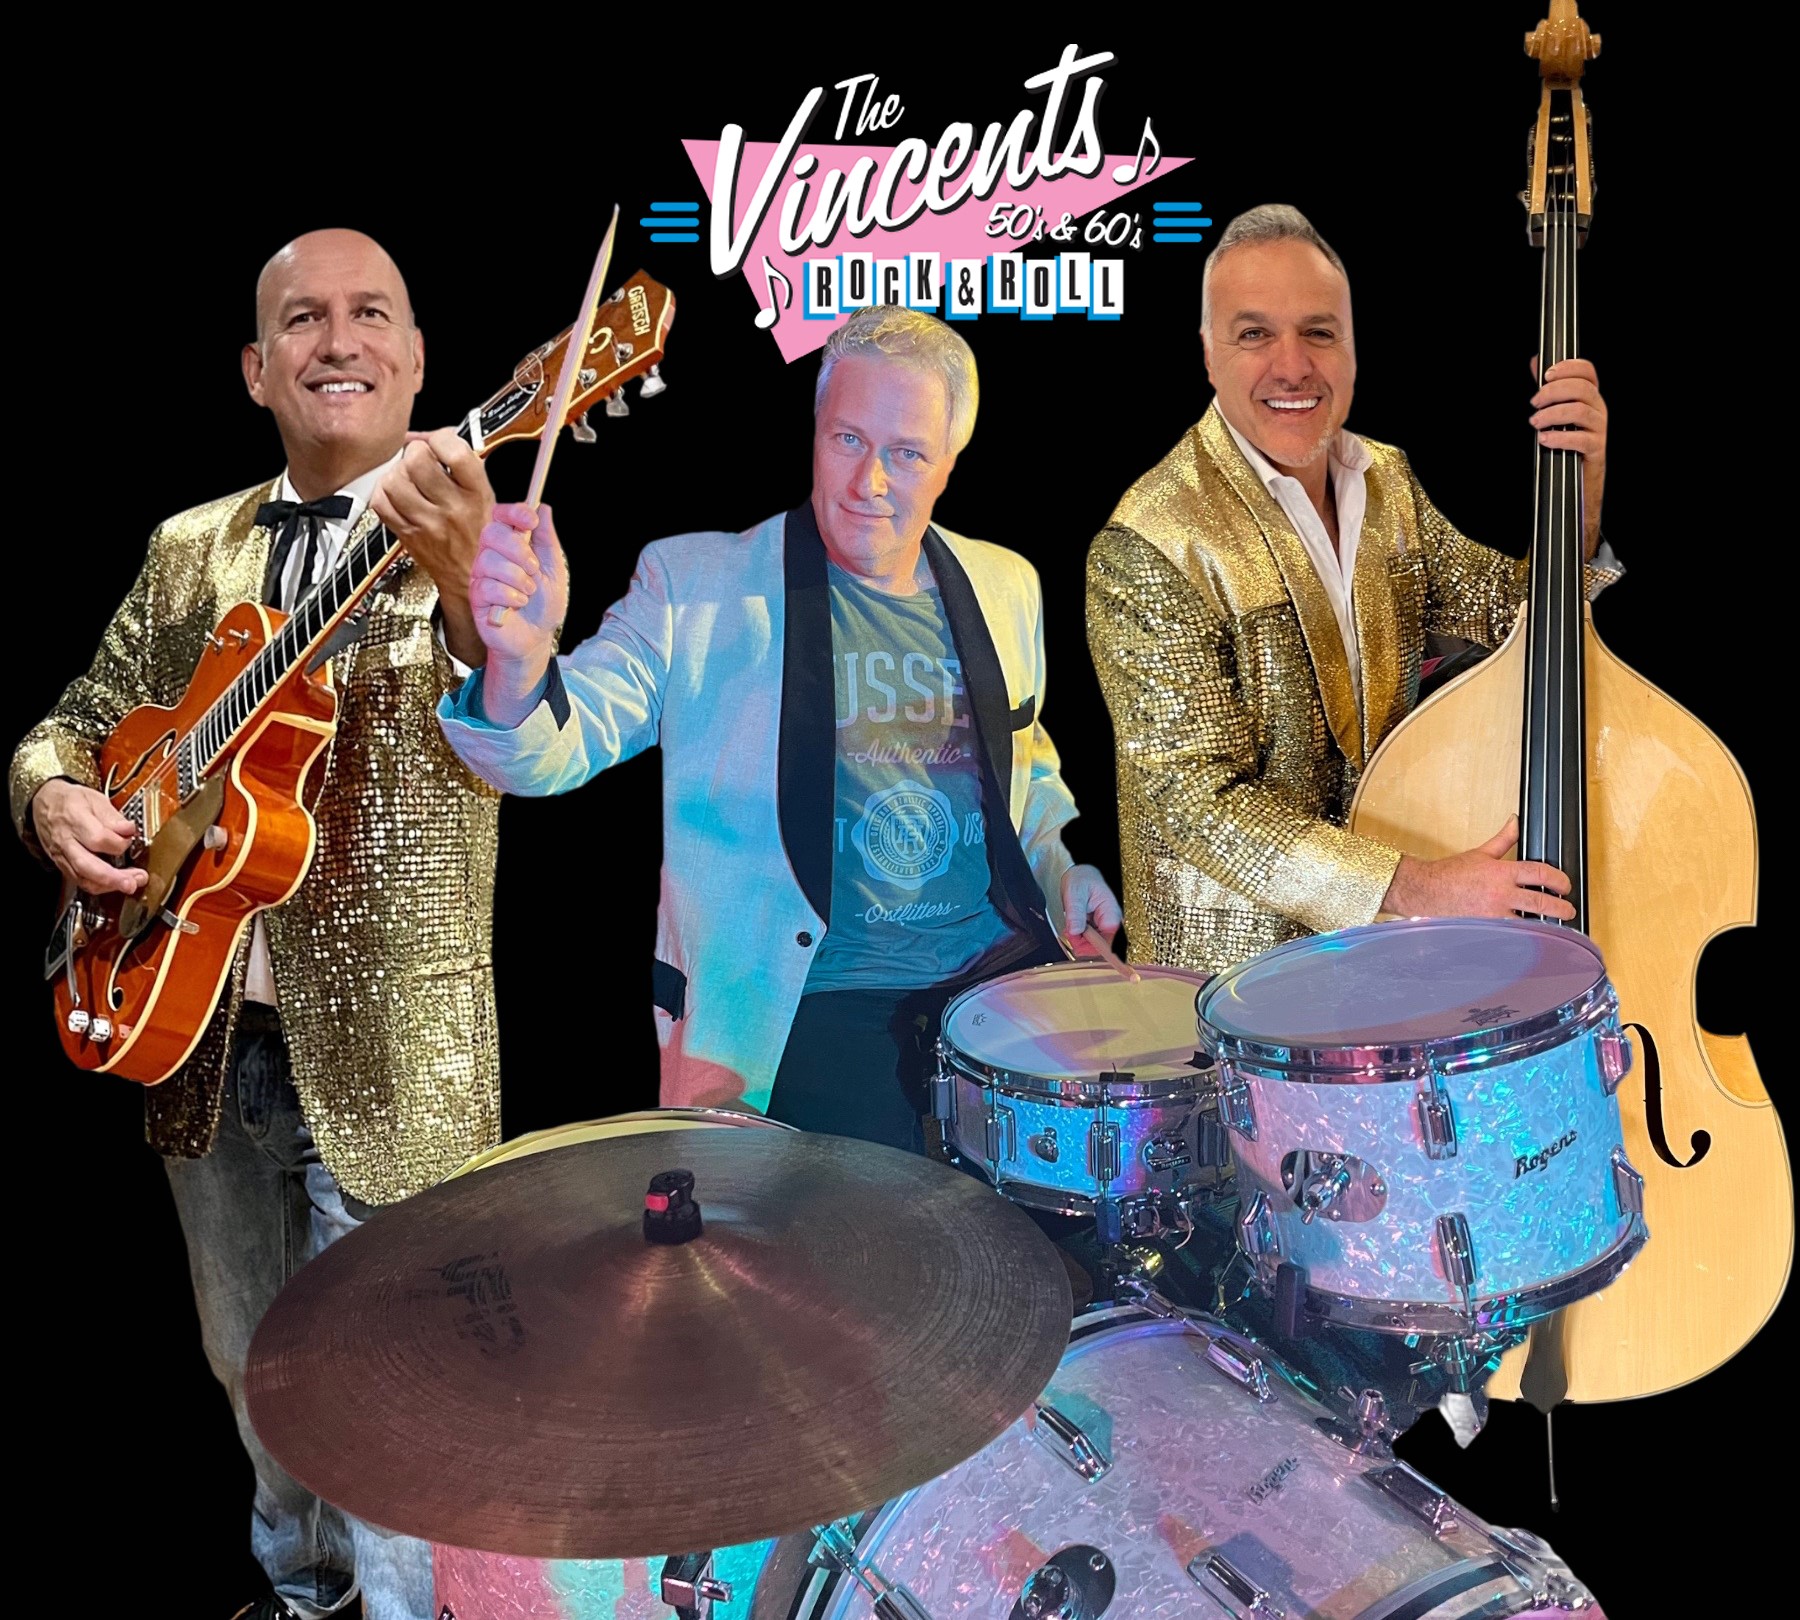 The Vincents Rock and Roll Band - THE VINCENTS ROCK & ROLL BAND